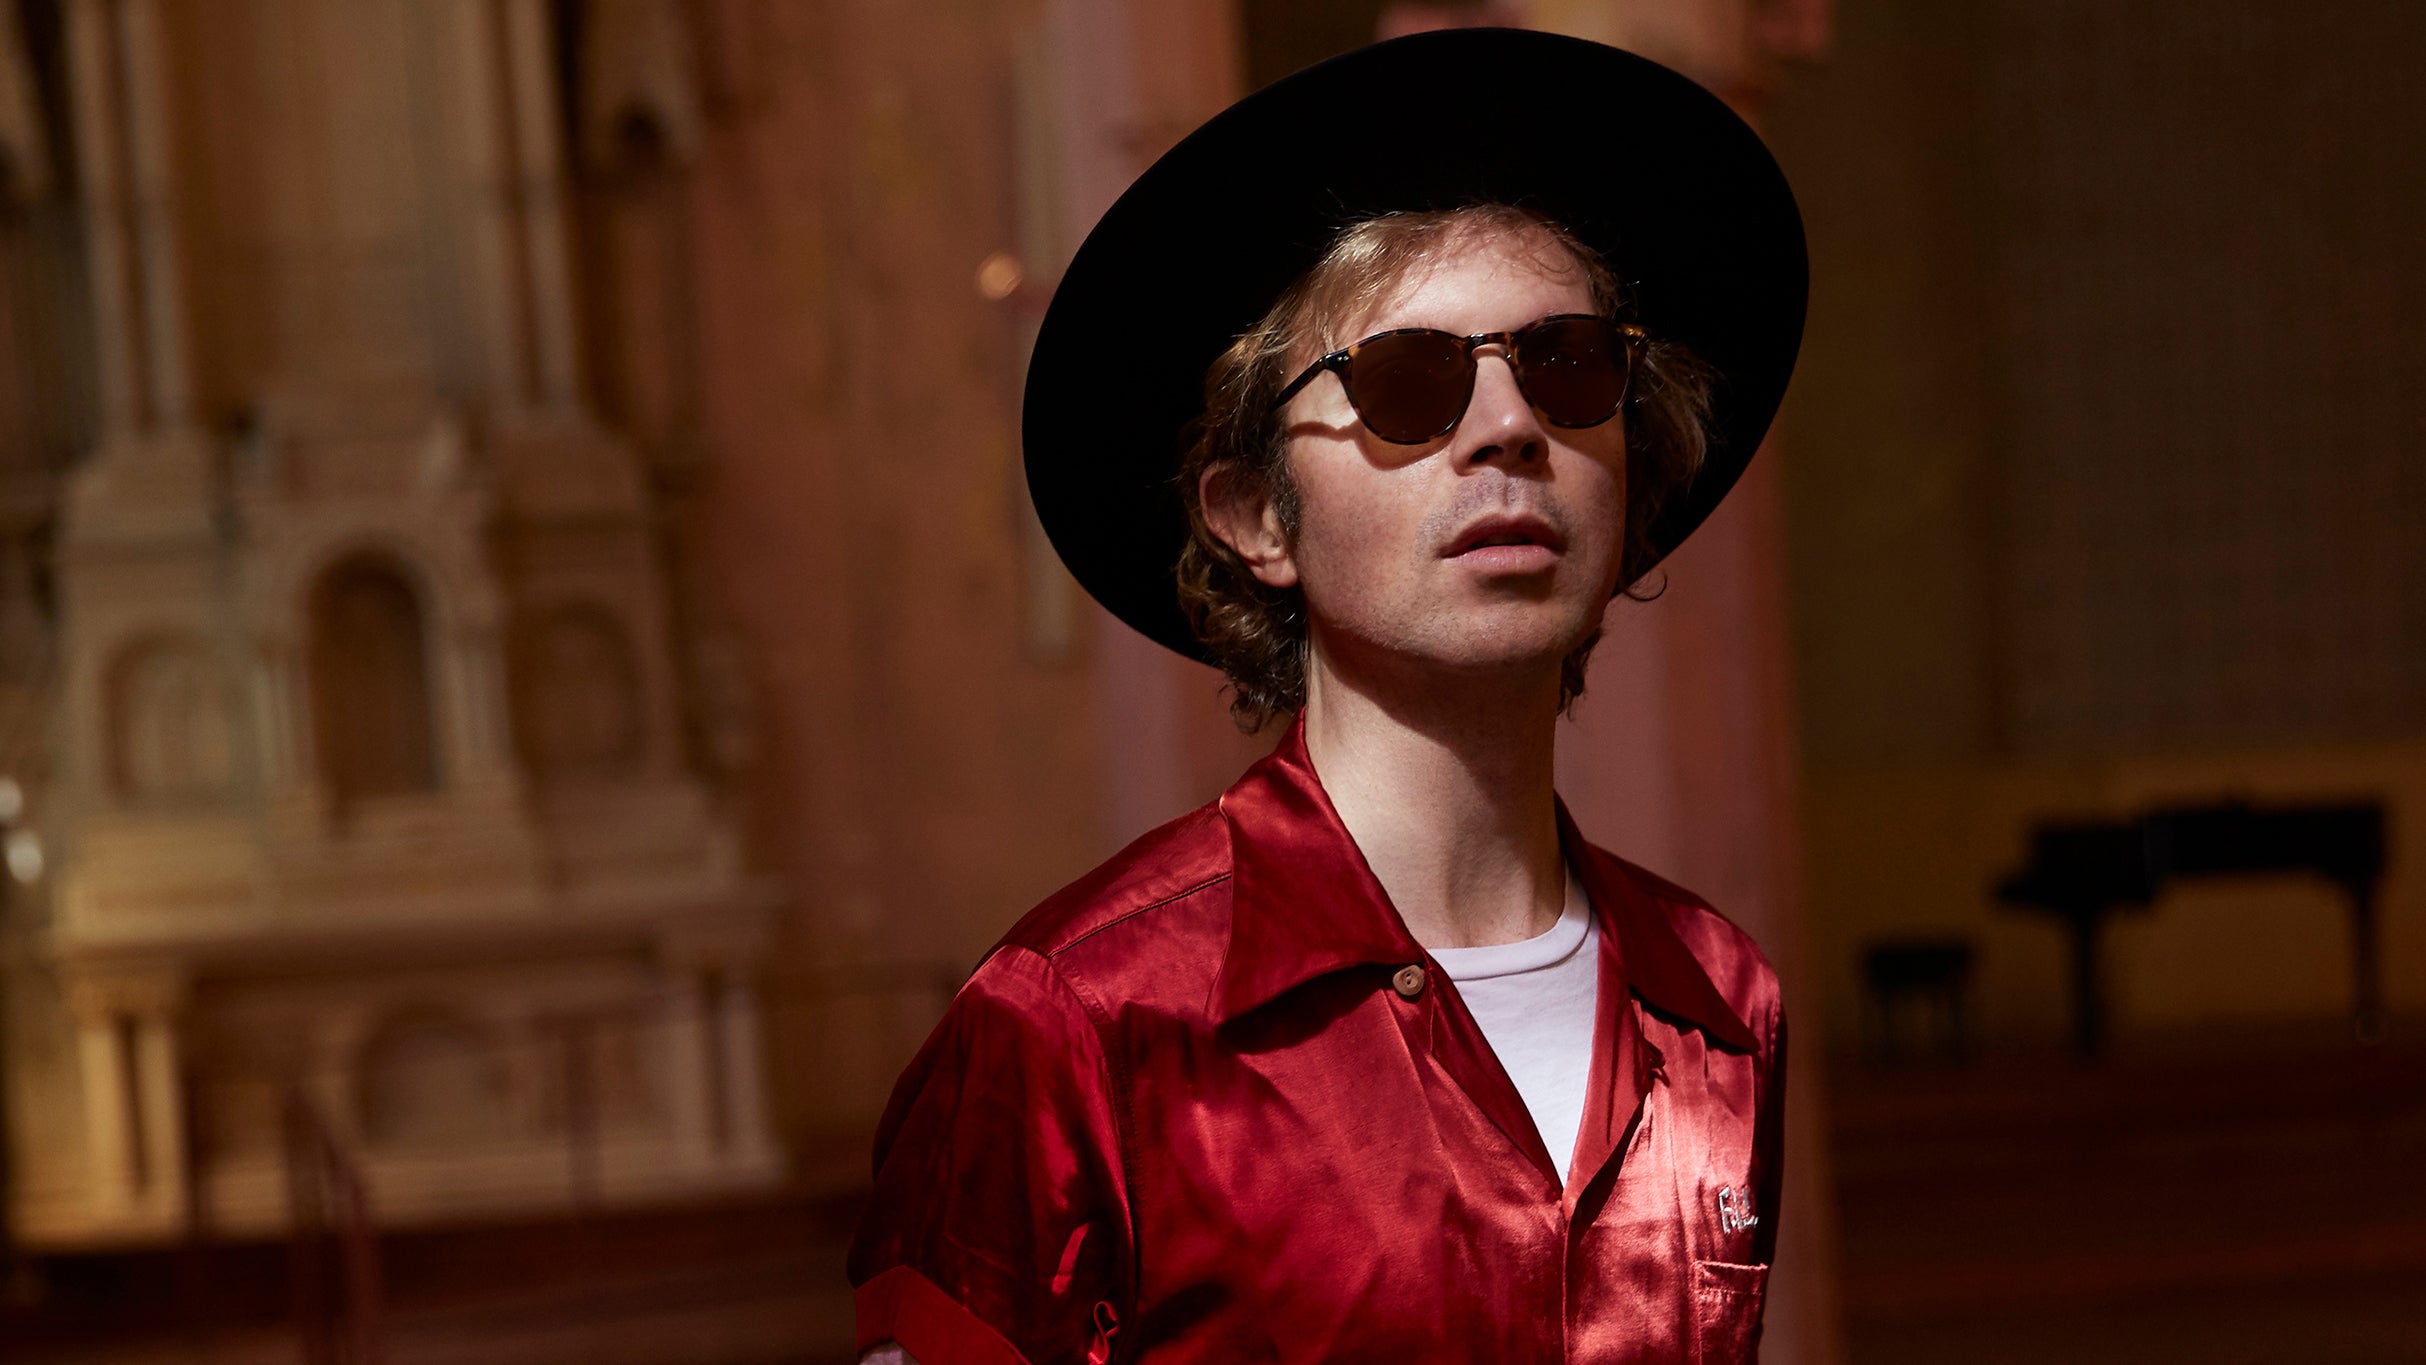 Beck with Phoenix in Costa Mesa event information